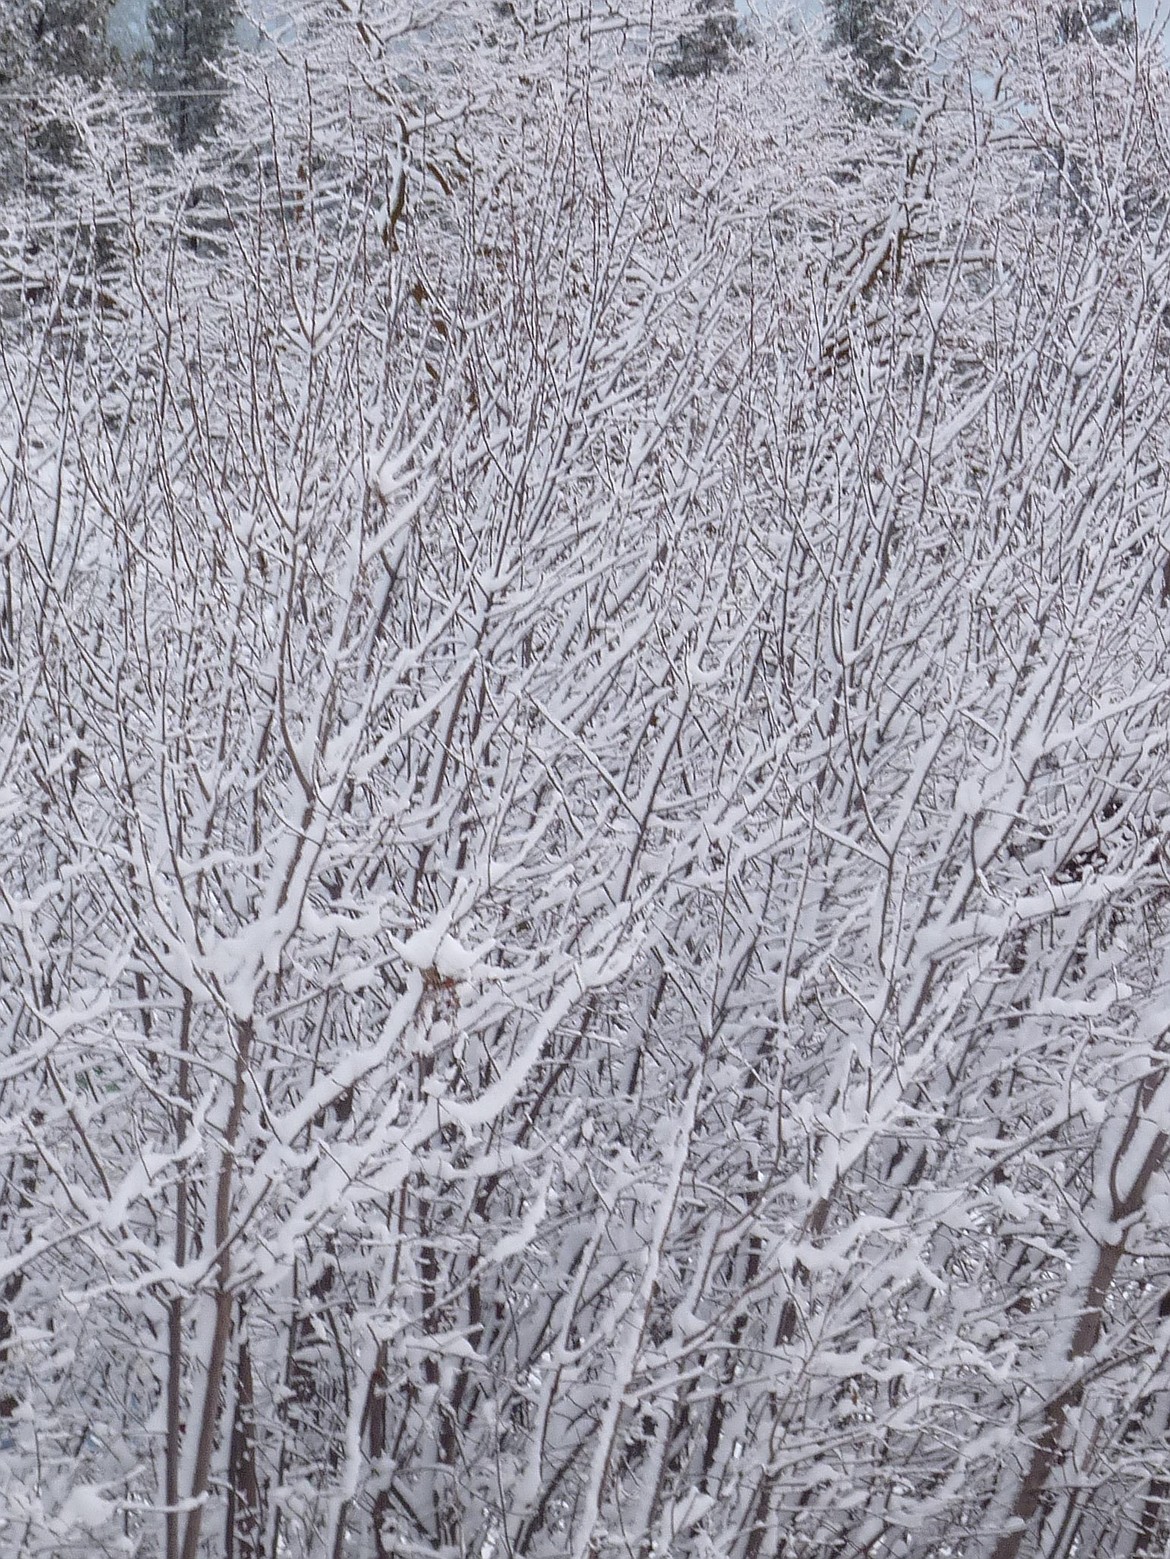 Chokecherry trees create a wave of lines and patterns in the newly fallen snow.